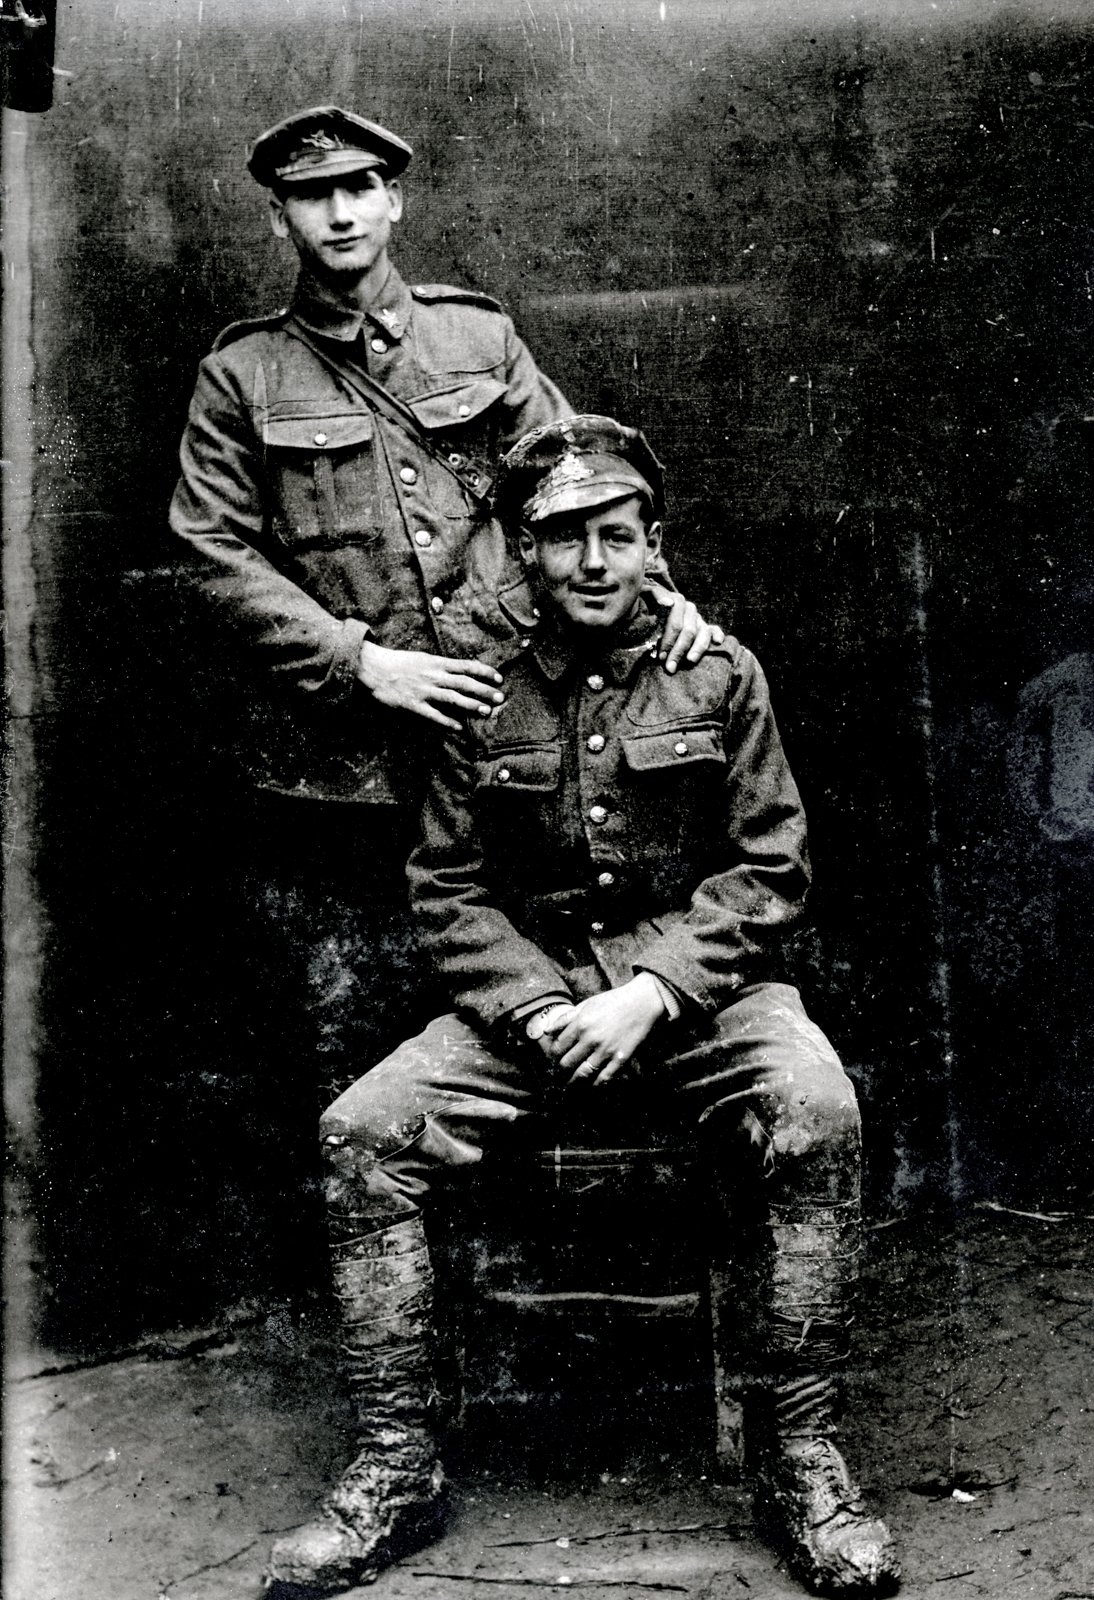 Bill Maguire Junior and fellow soldier in military uniform, pictured near the front, First World War.